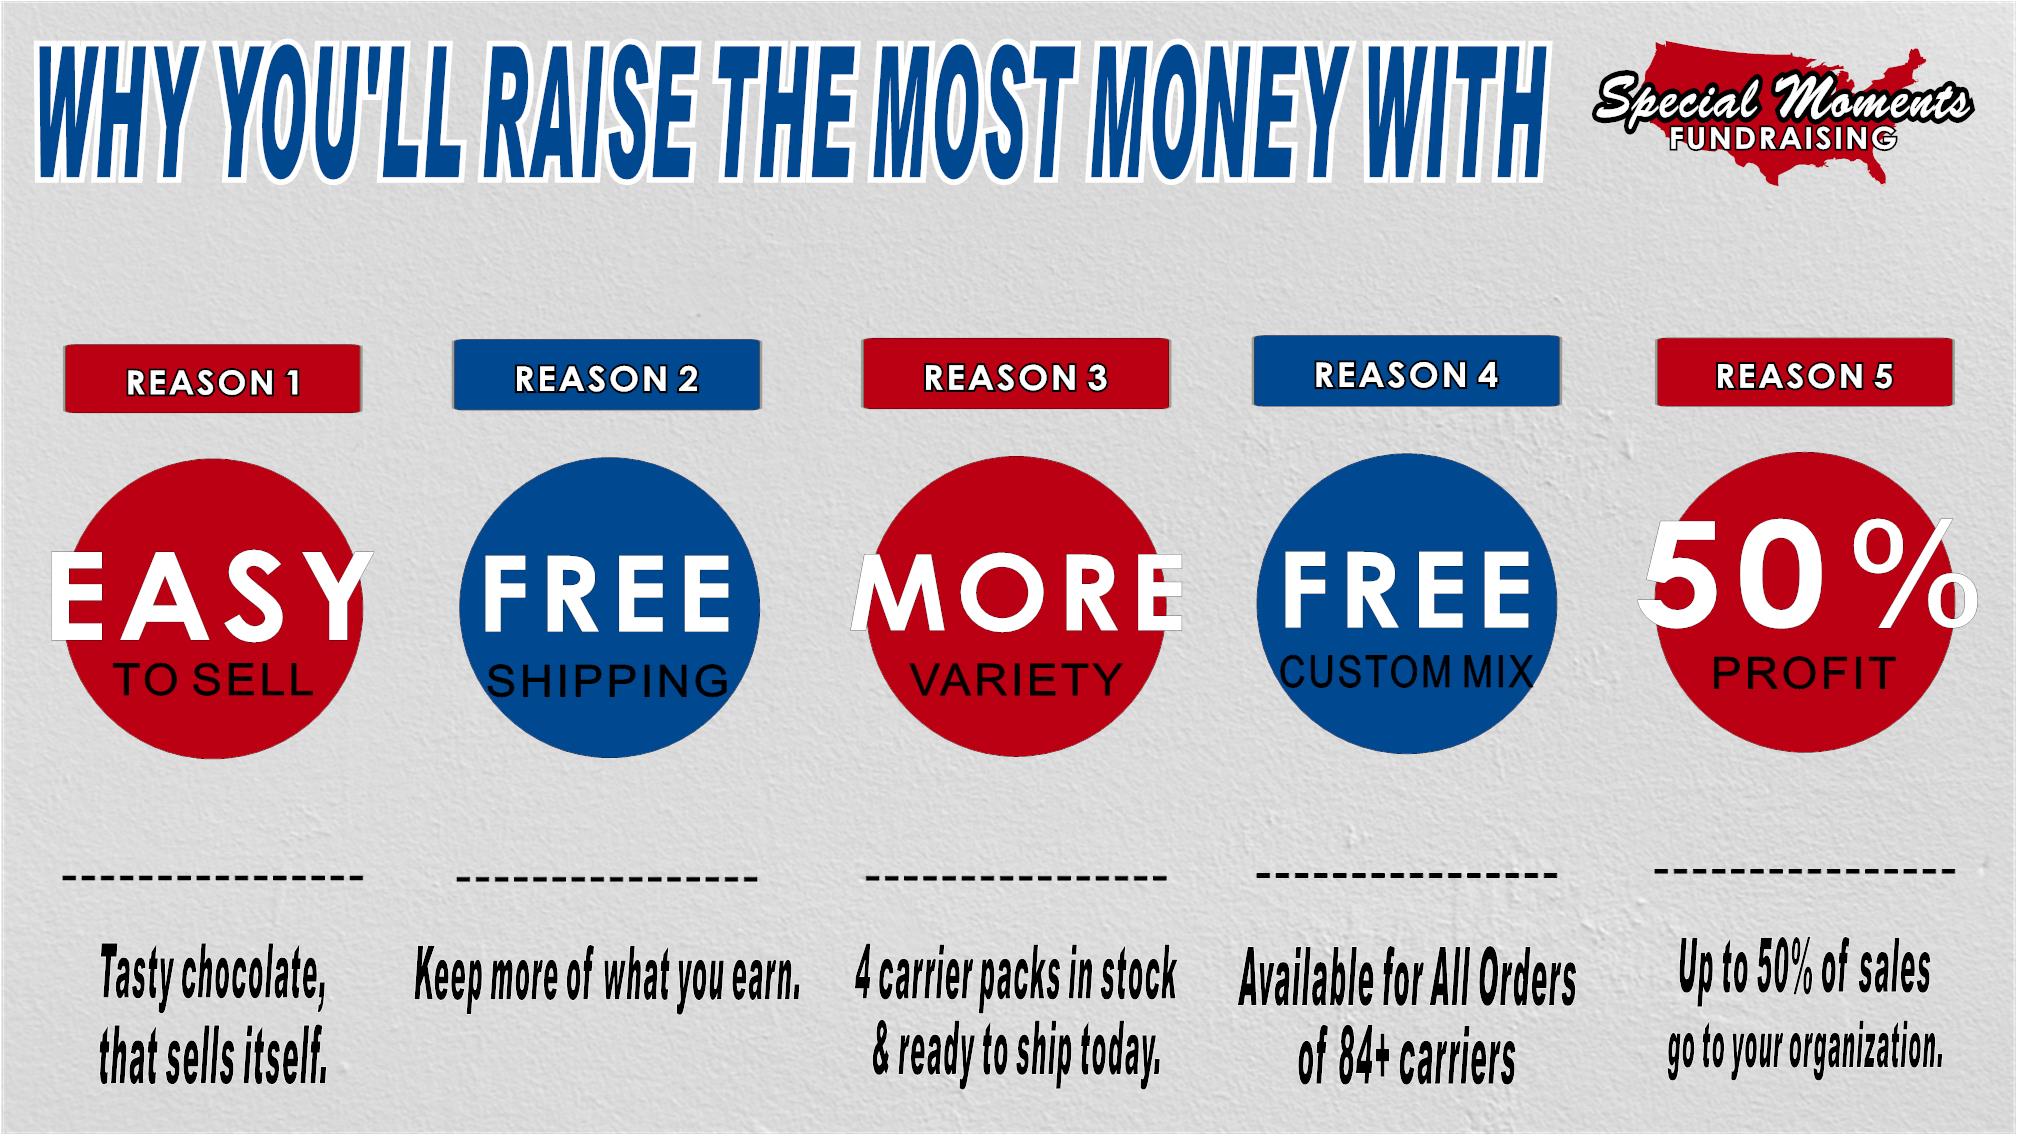 Why You'll Raise More Money With Special Moments Fundraising (1)